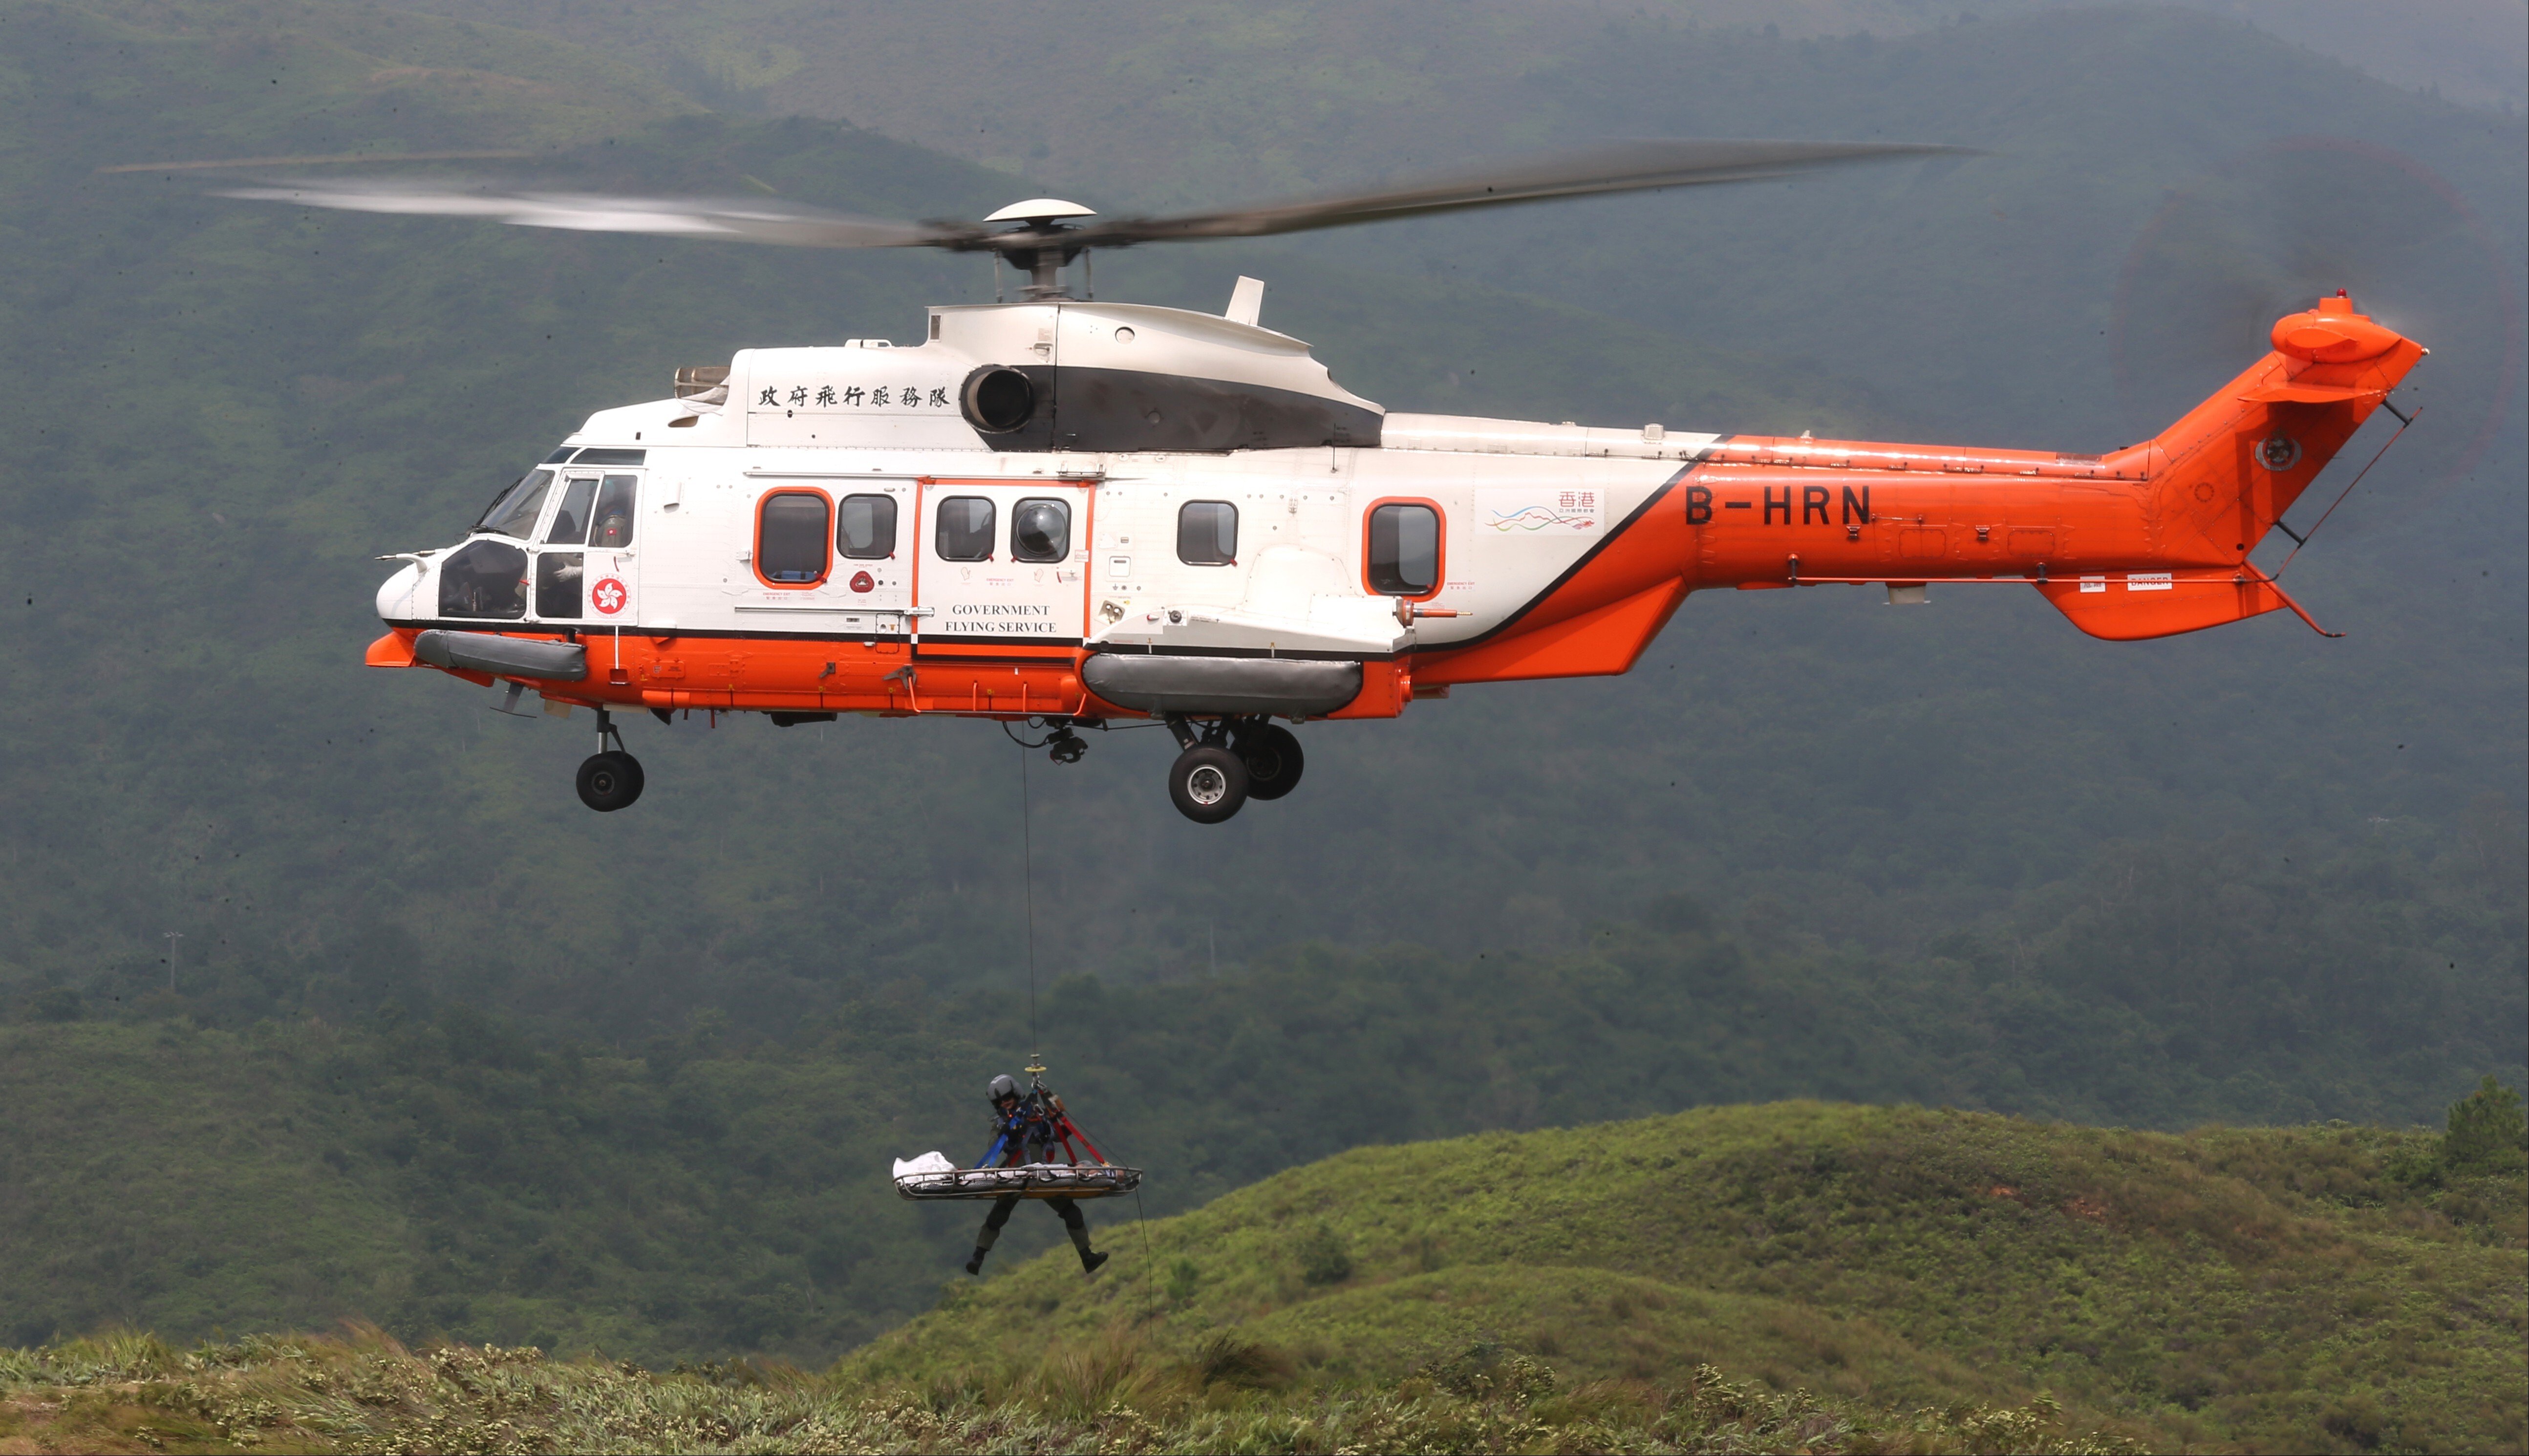 Hong Kong’s fire and flying services personnel, the Hospital Authority, and other government bodies hold an interdepartmental exercise simulating a vegetation fire and mountain rescue operation, in Lam Tsuen Country Park in the northern New Territories. Photo: K.Y. Cheng